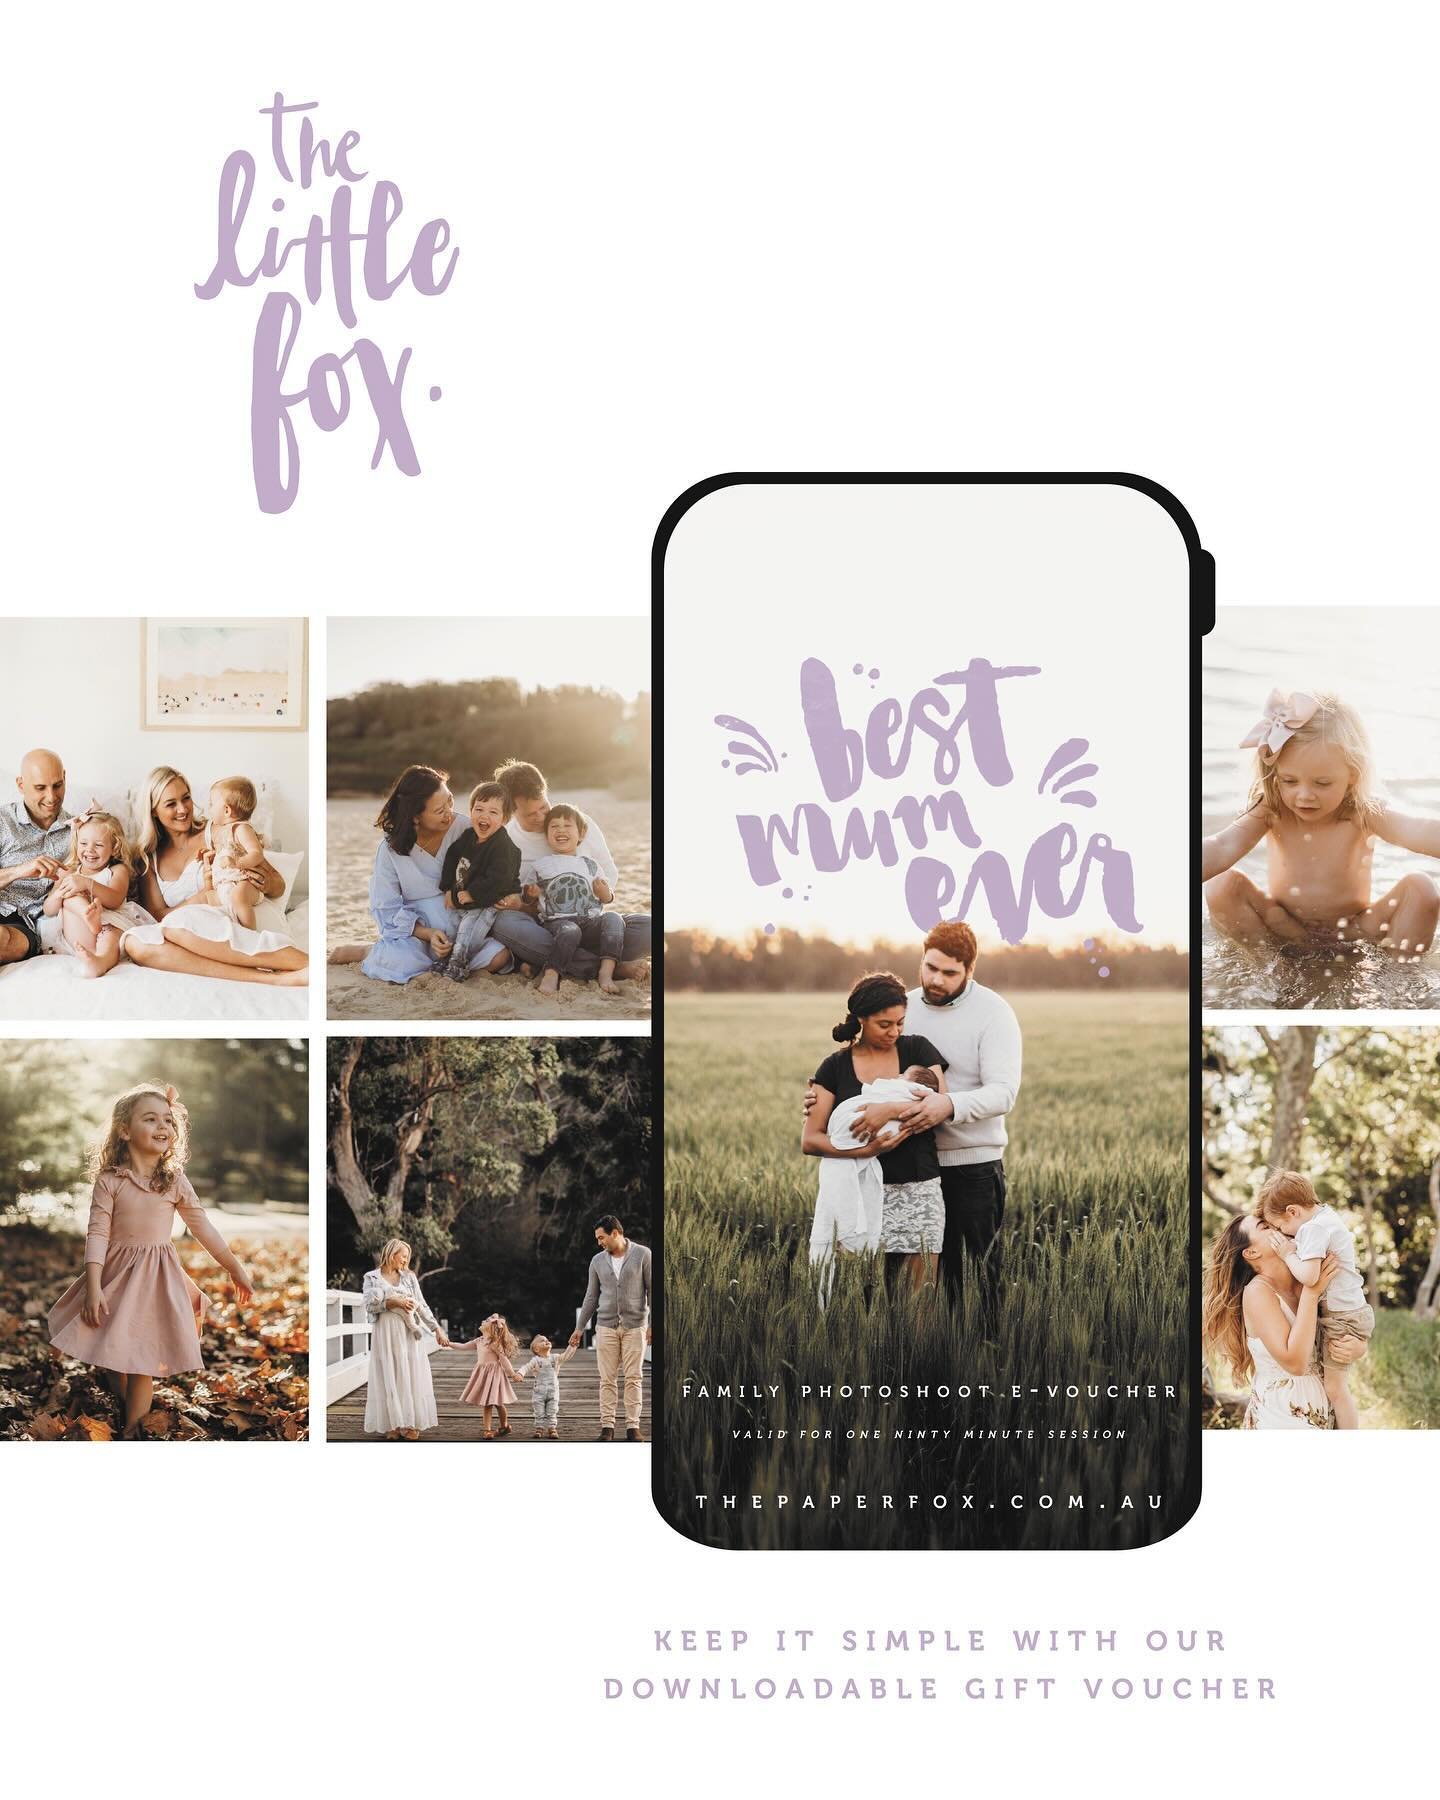 We love the simplicity of a downloadable voucher almost as much as you love your mum 💜🤰🏼
We have gift vouchers available on our shop front for this Mother&rsquo;s Day for a bespoke family shoot.

Vouchers are valid for up to 12 months 🥰

#thelitt